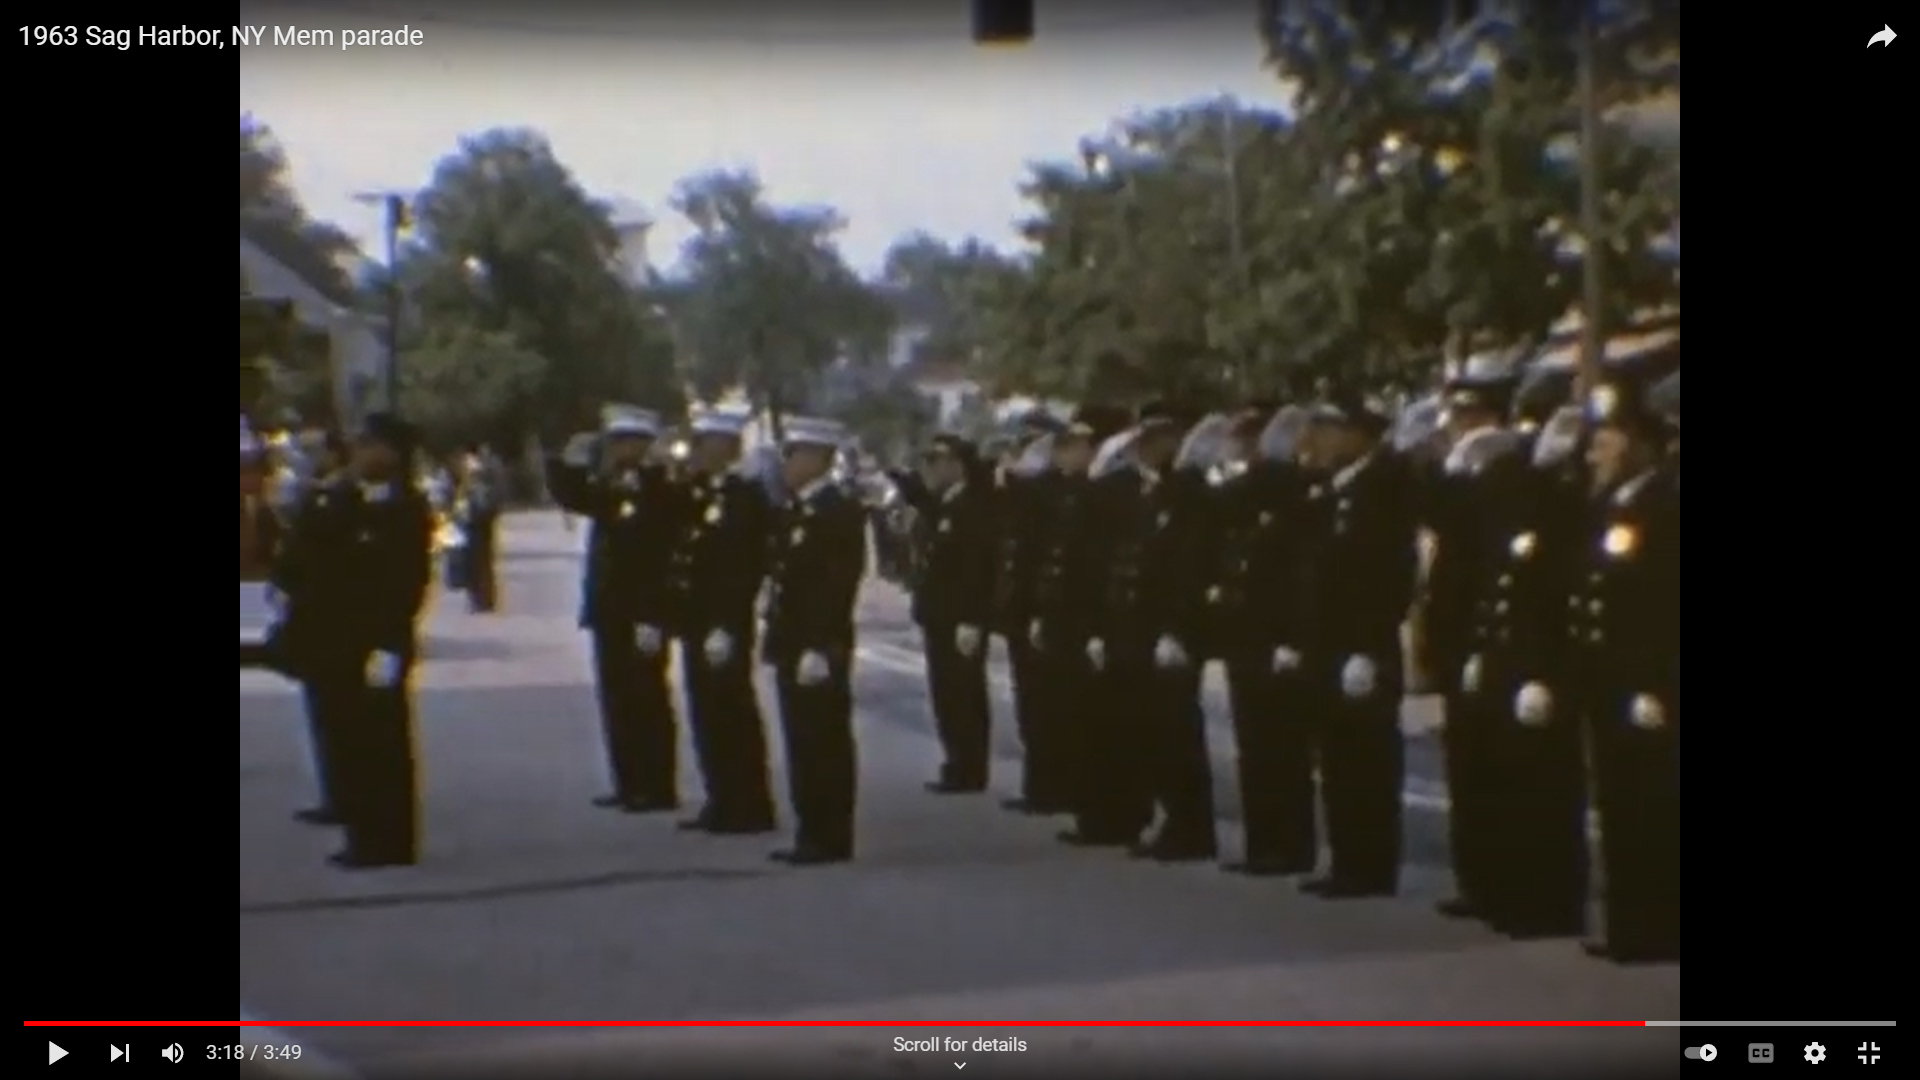 Members of the Sag Harbor Fire Department stand at attention during the 1963 Memorial Day parade.